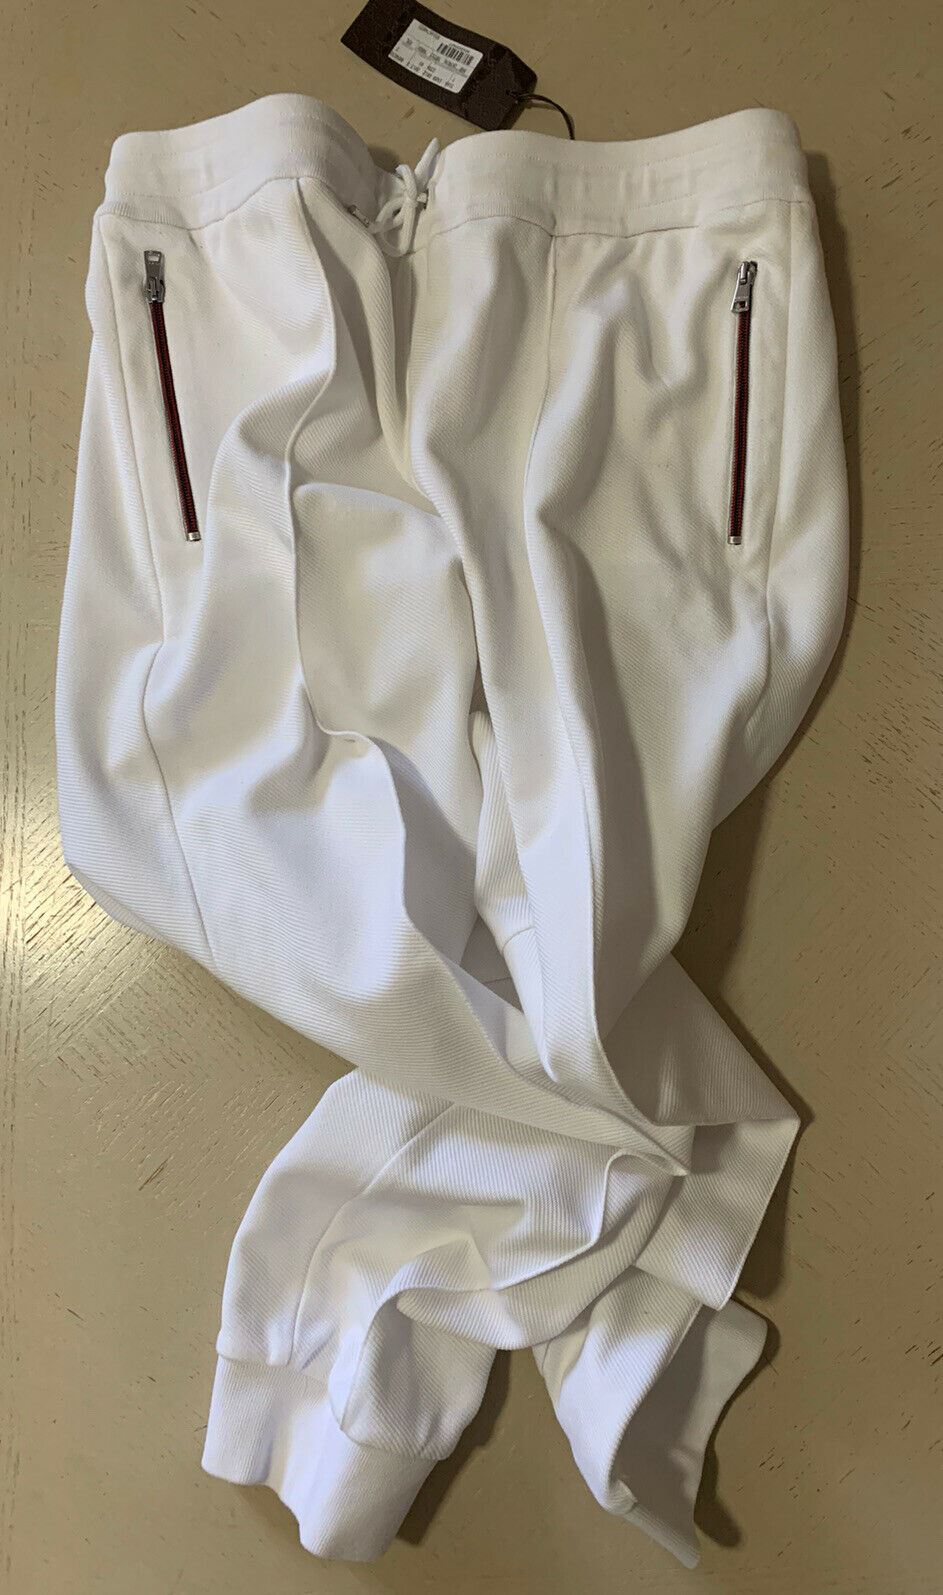 NWT $1245 Gucci Mens Sweat Pants White Size XXL Made in Italy